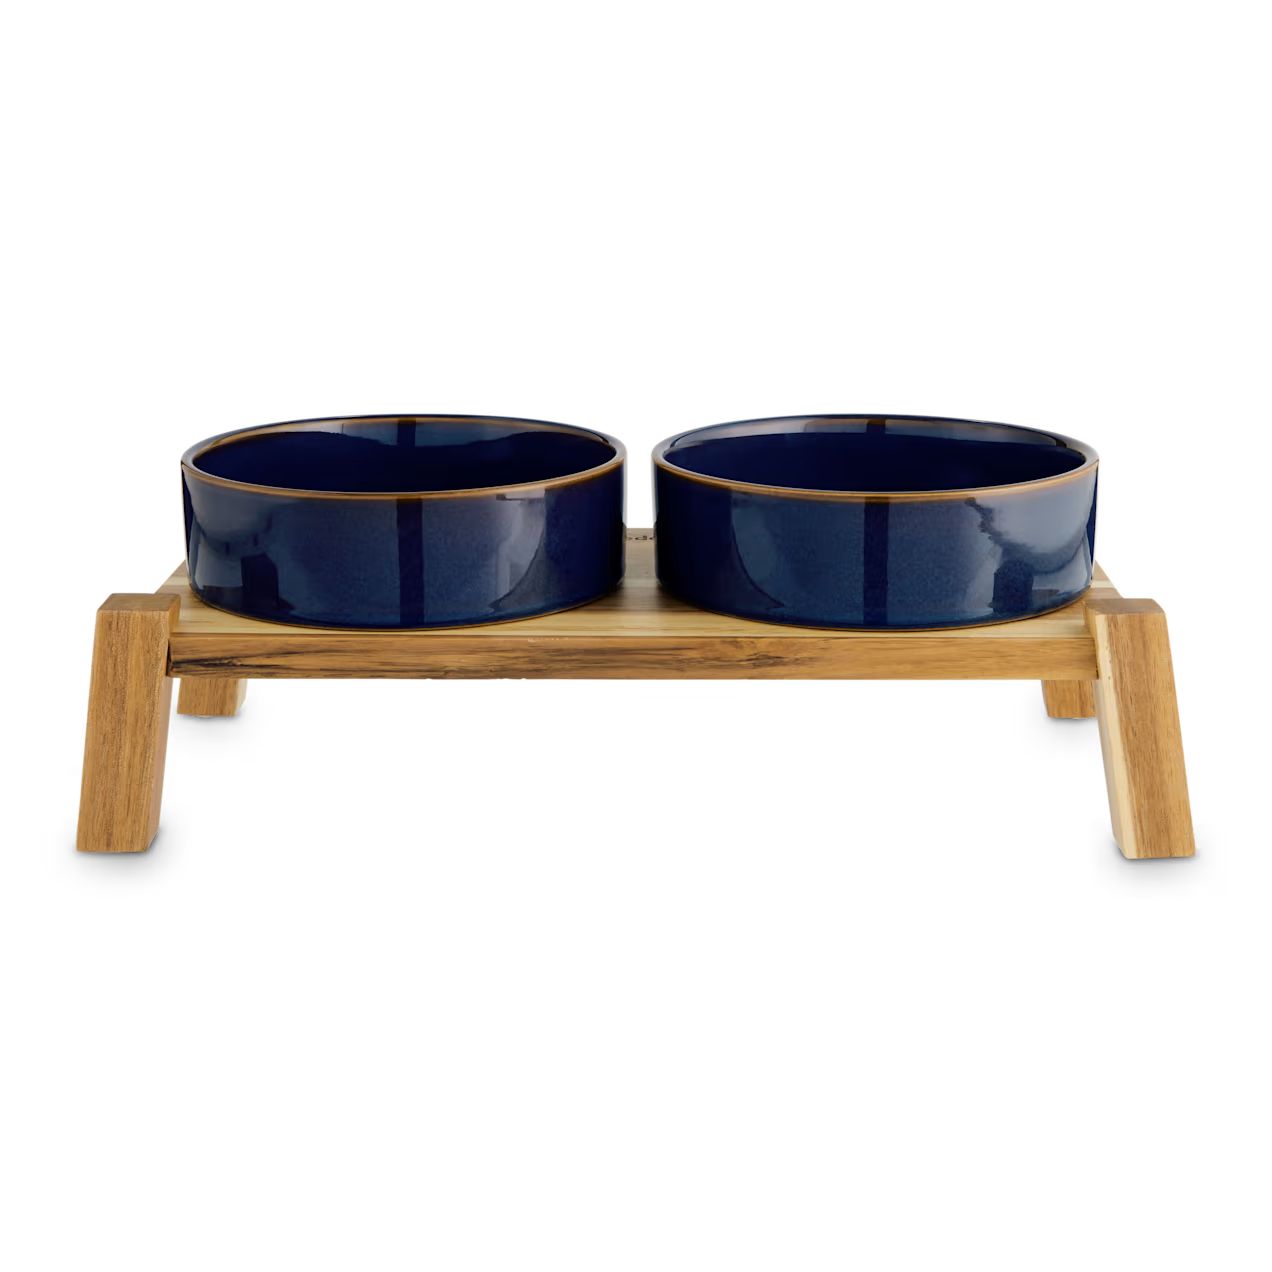 Reddy Indigo Ceramic & Wood Elevated Double Diner for Dogs, 3.8 Cup | Petco | Petco